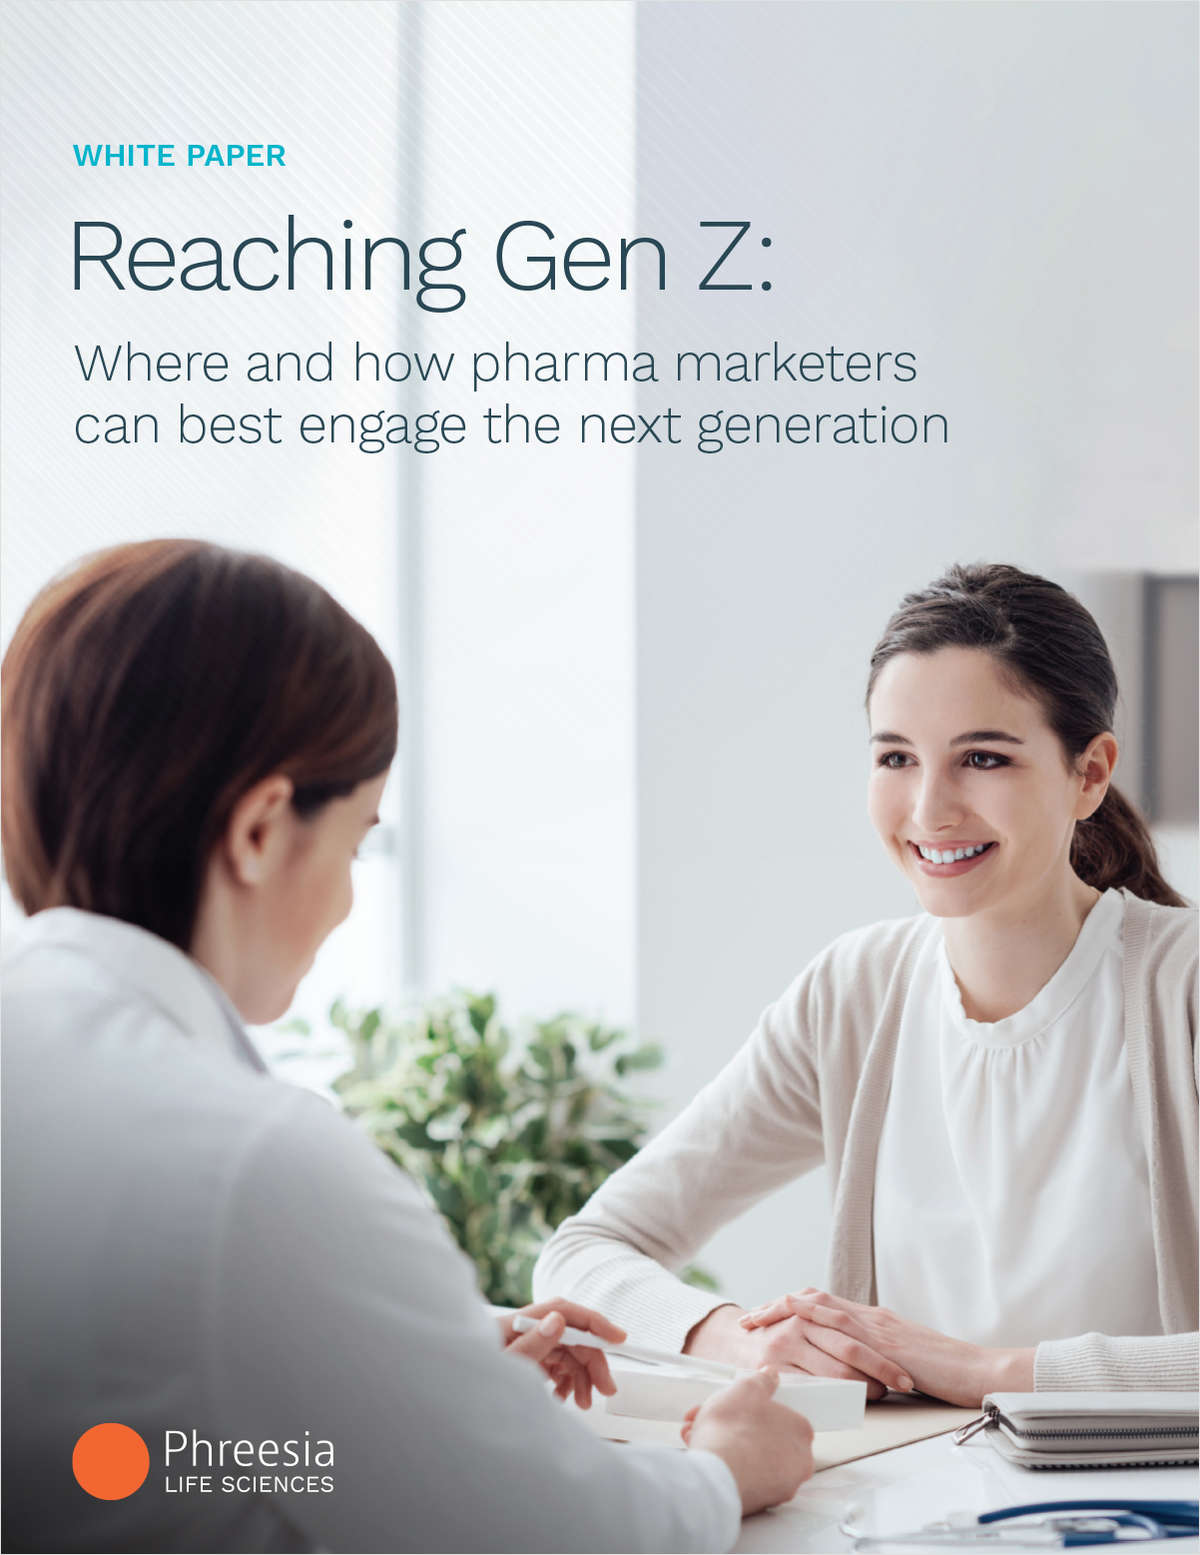 Reaching Gen Z: How pharma marketers can best engage the next generation